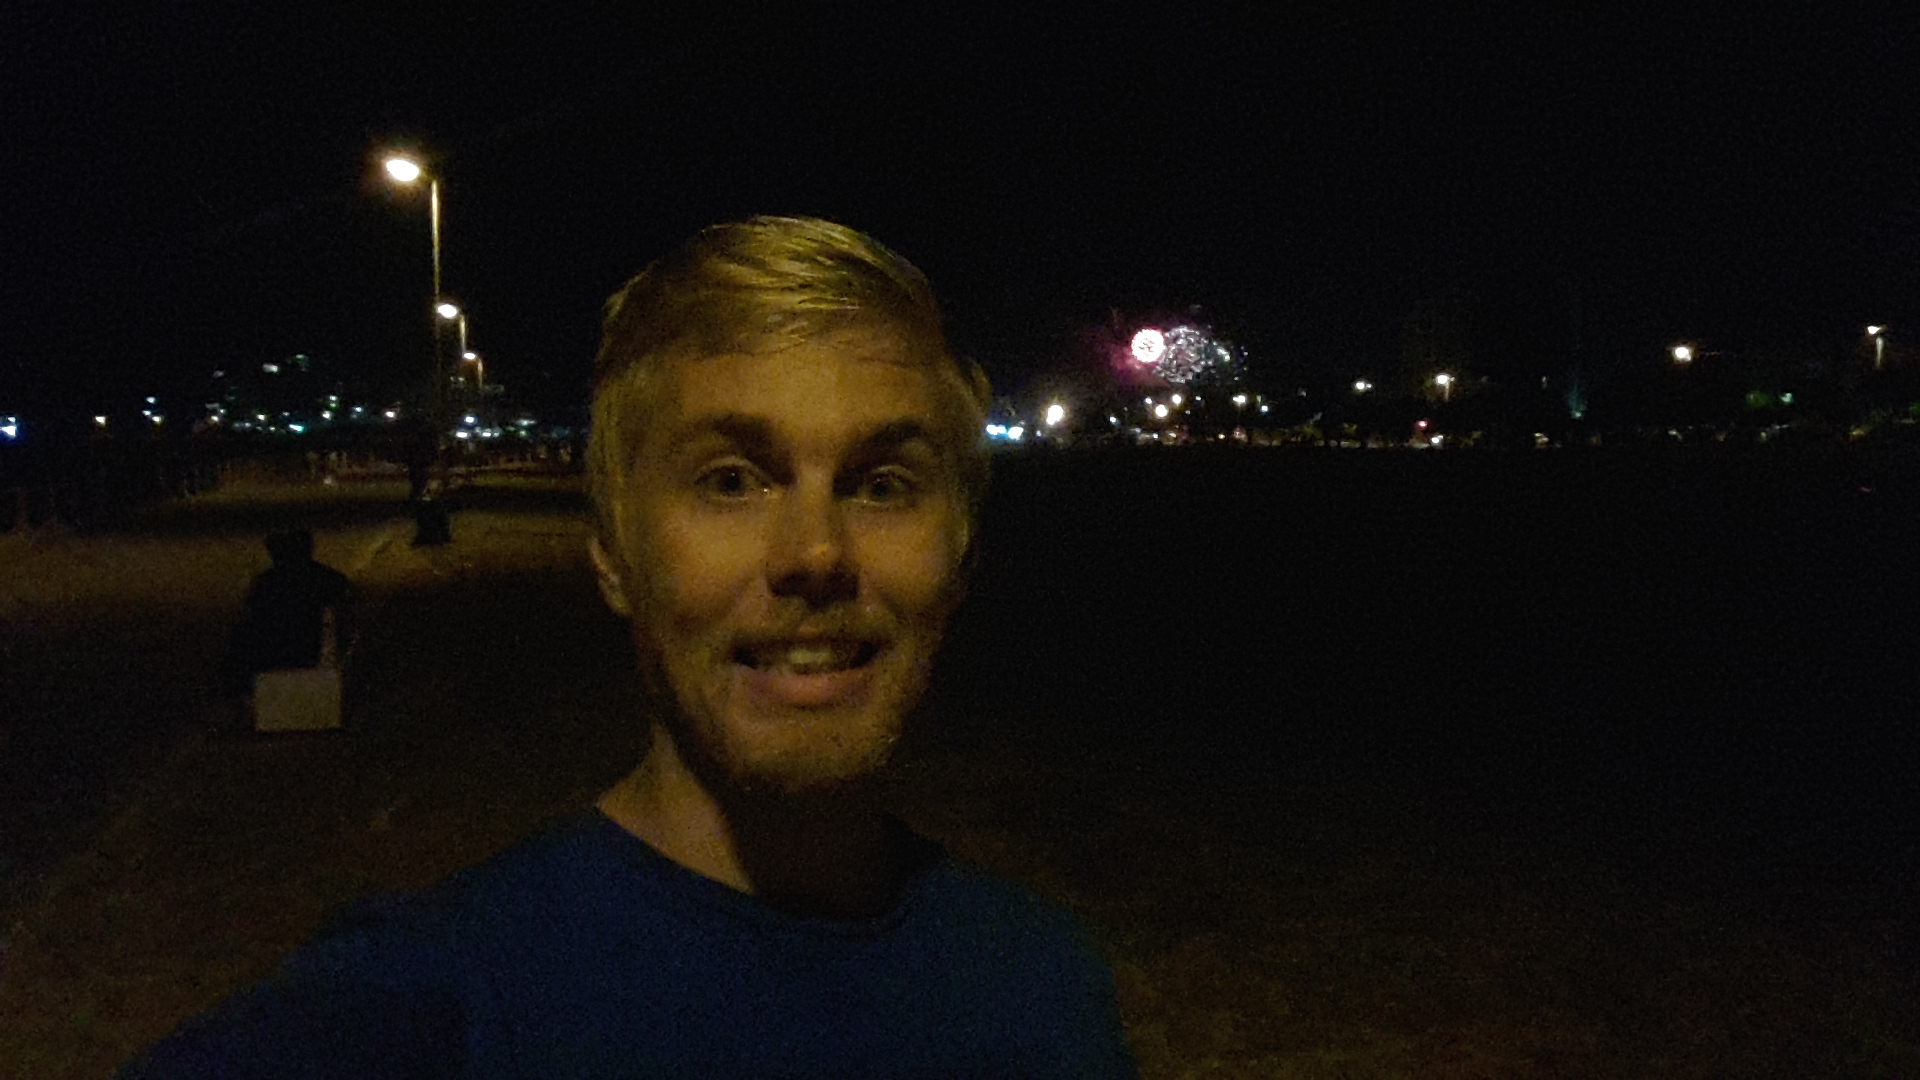 New Year in Cape Town. Fireworks were at the other side of the town.